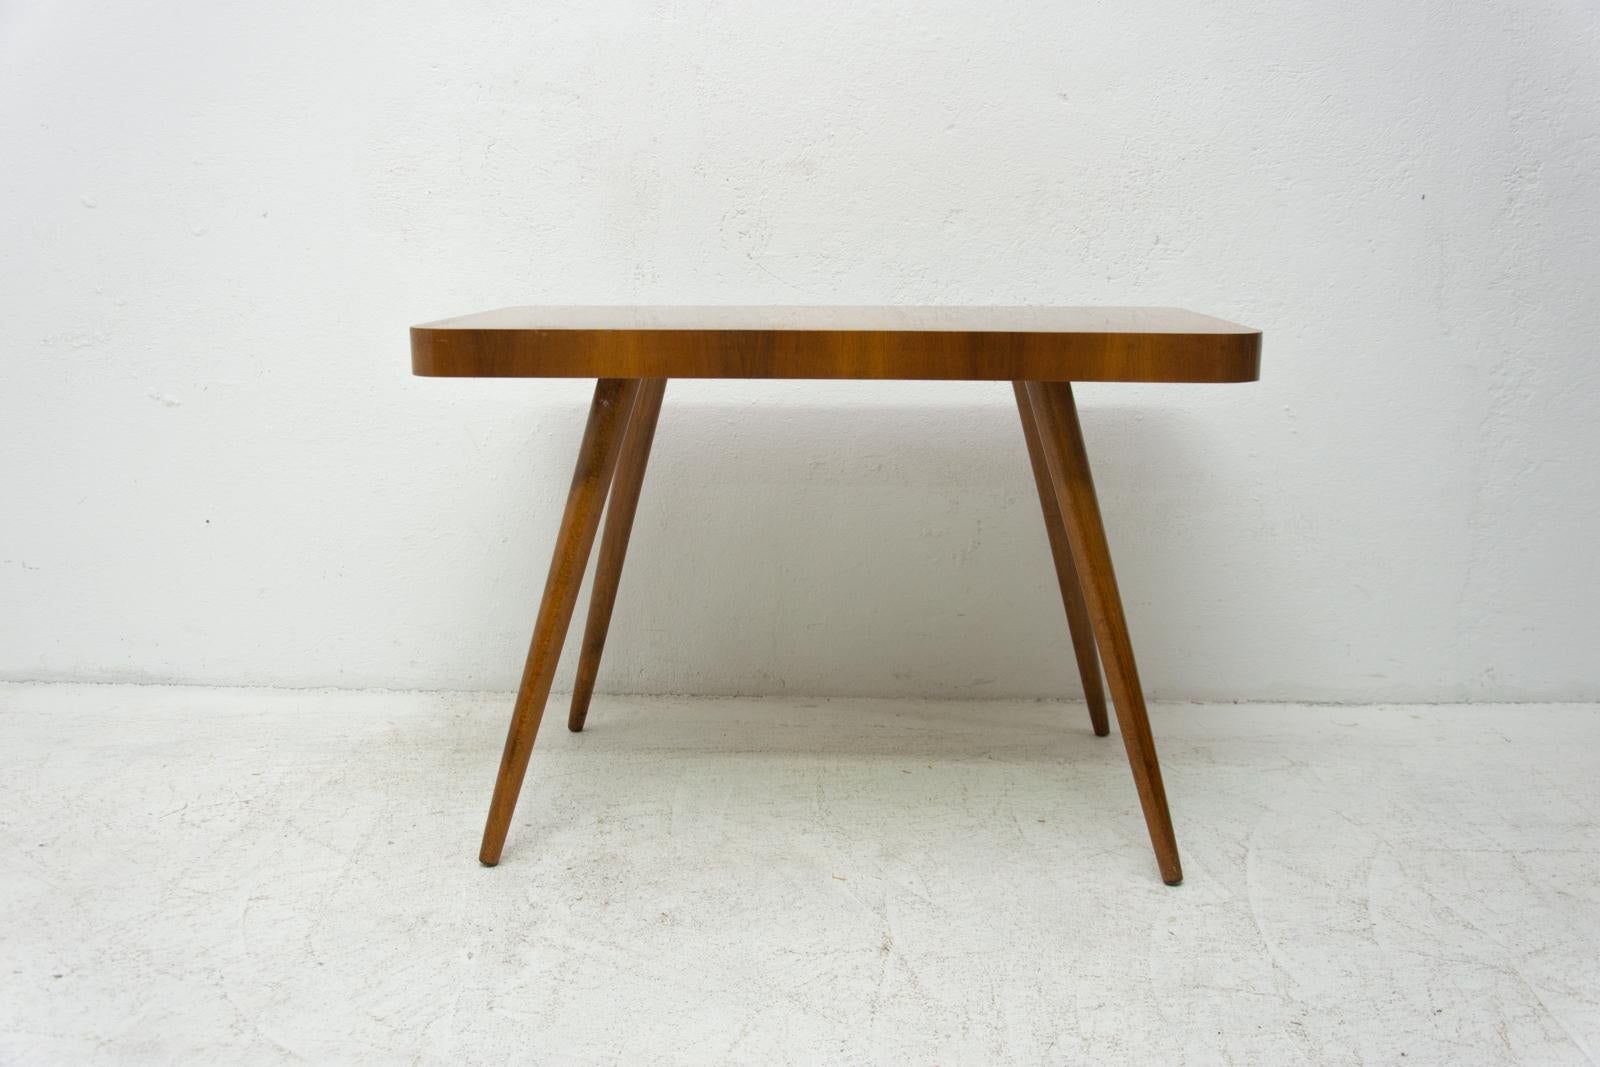 Midcentury walnut coffee table, made in the former Czechoslovakia in the 1960s.

Associated with the world-renowned exhibition EXPO 58 in Brussels. It was produced by Ceský nábytek company. It´s made of walnut with beech legs. In very good vintage